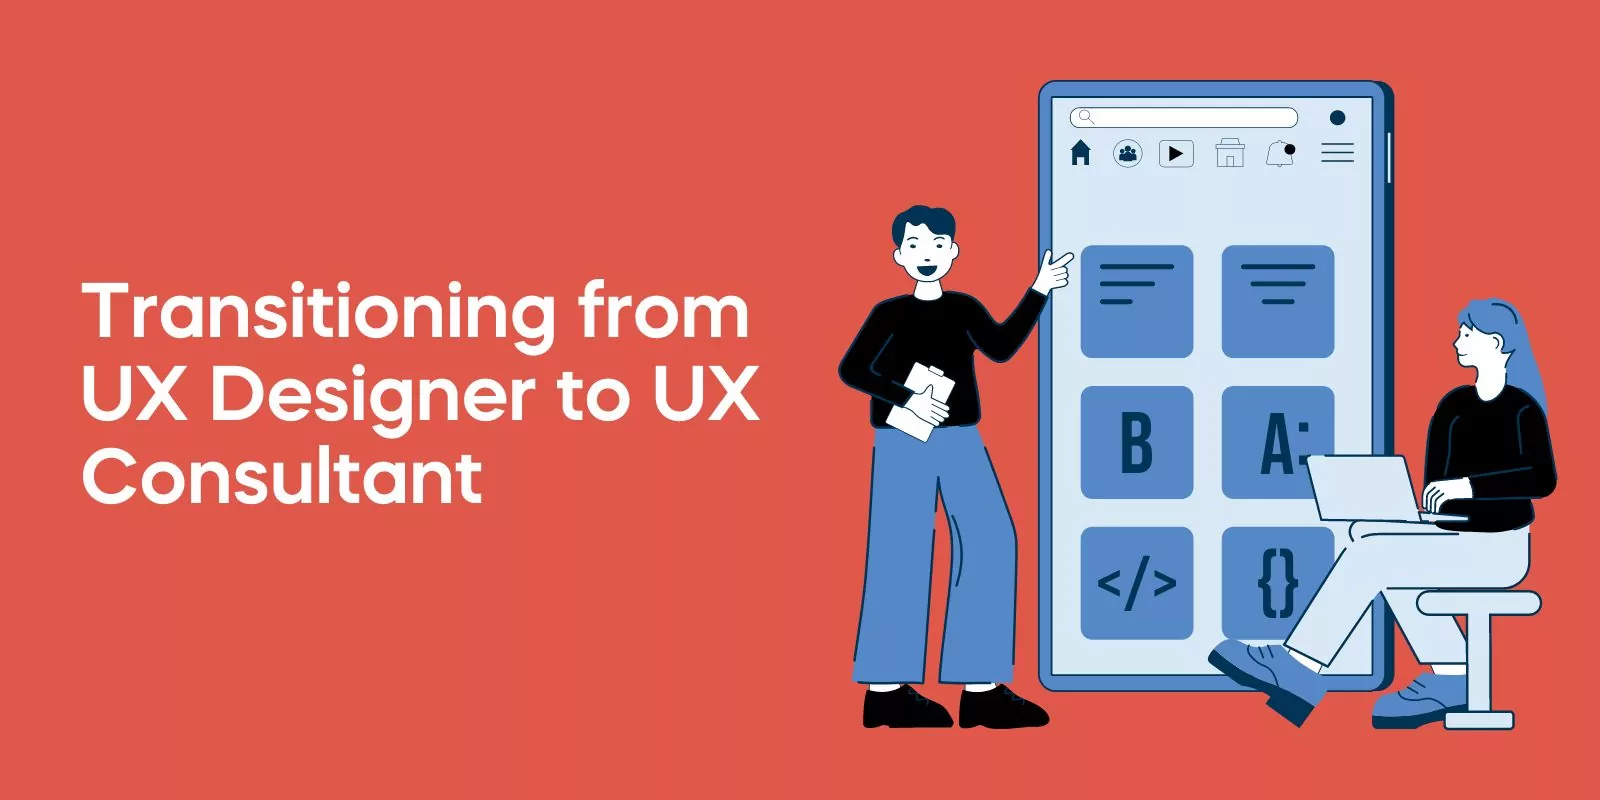 Transitioning from UX Designer to UX Consultant